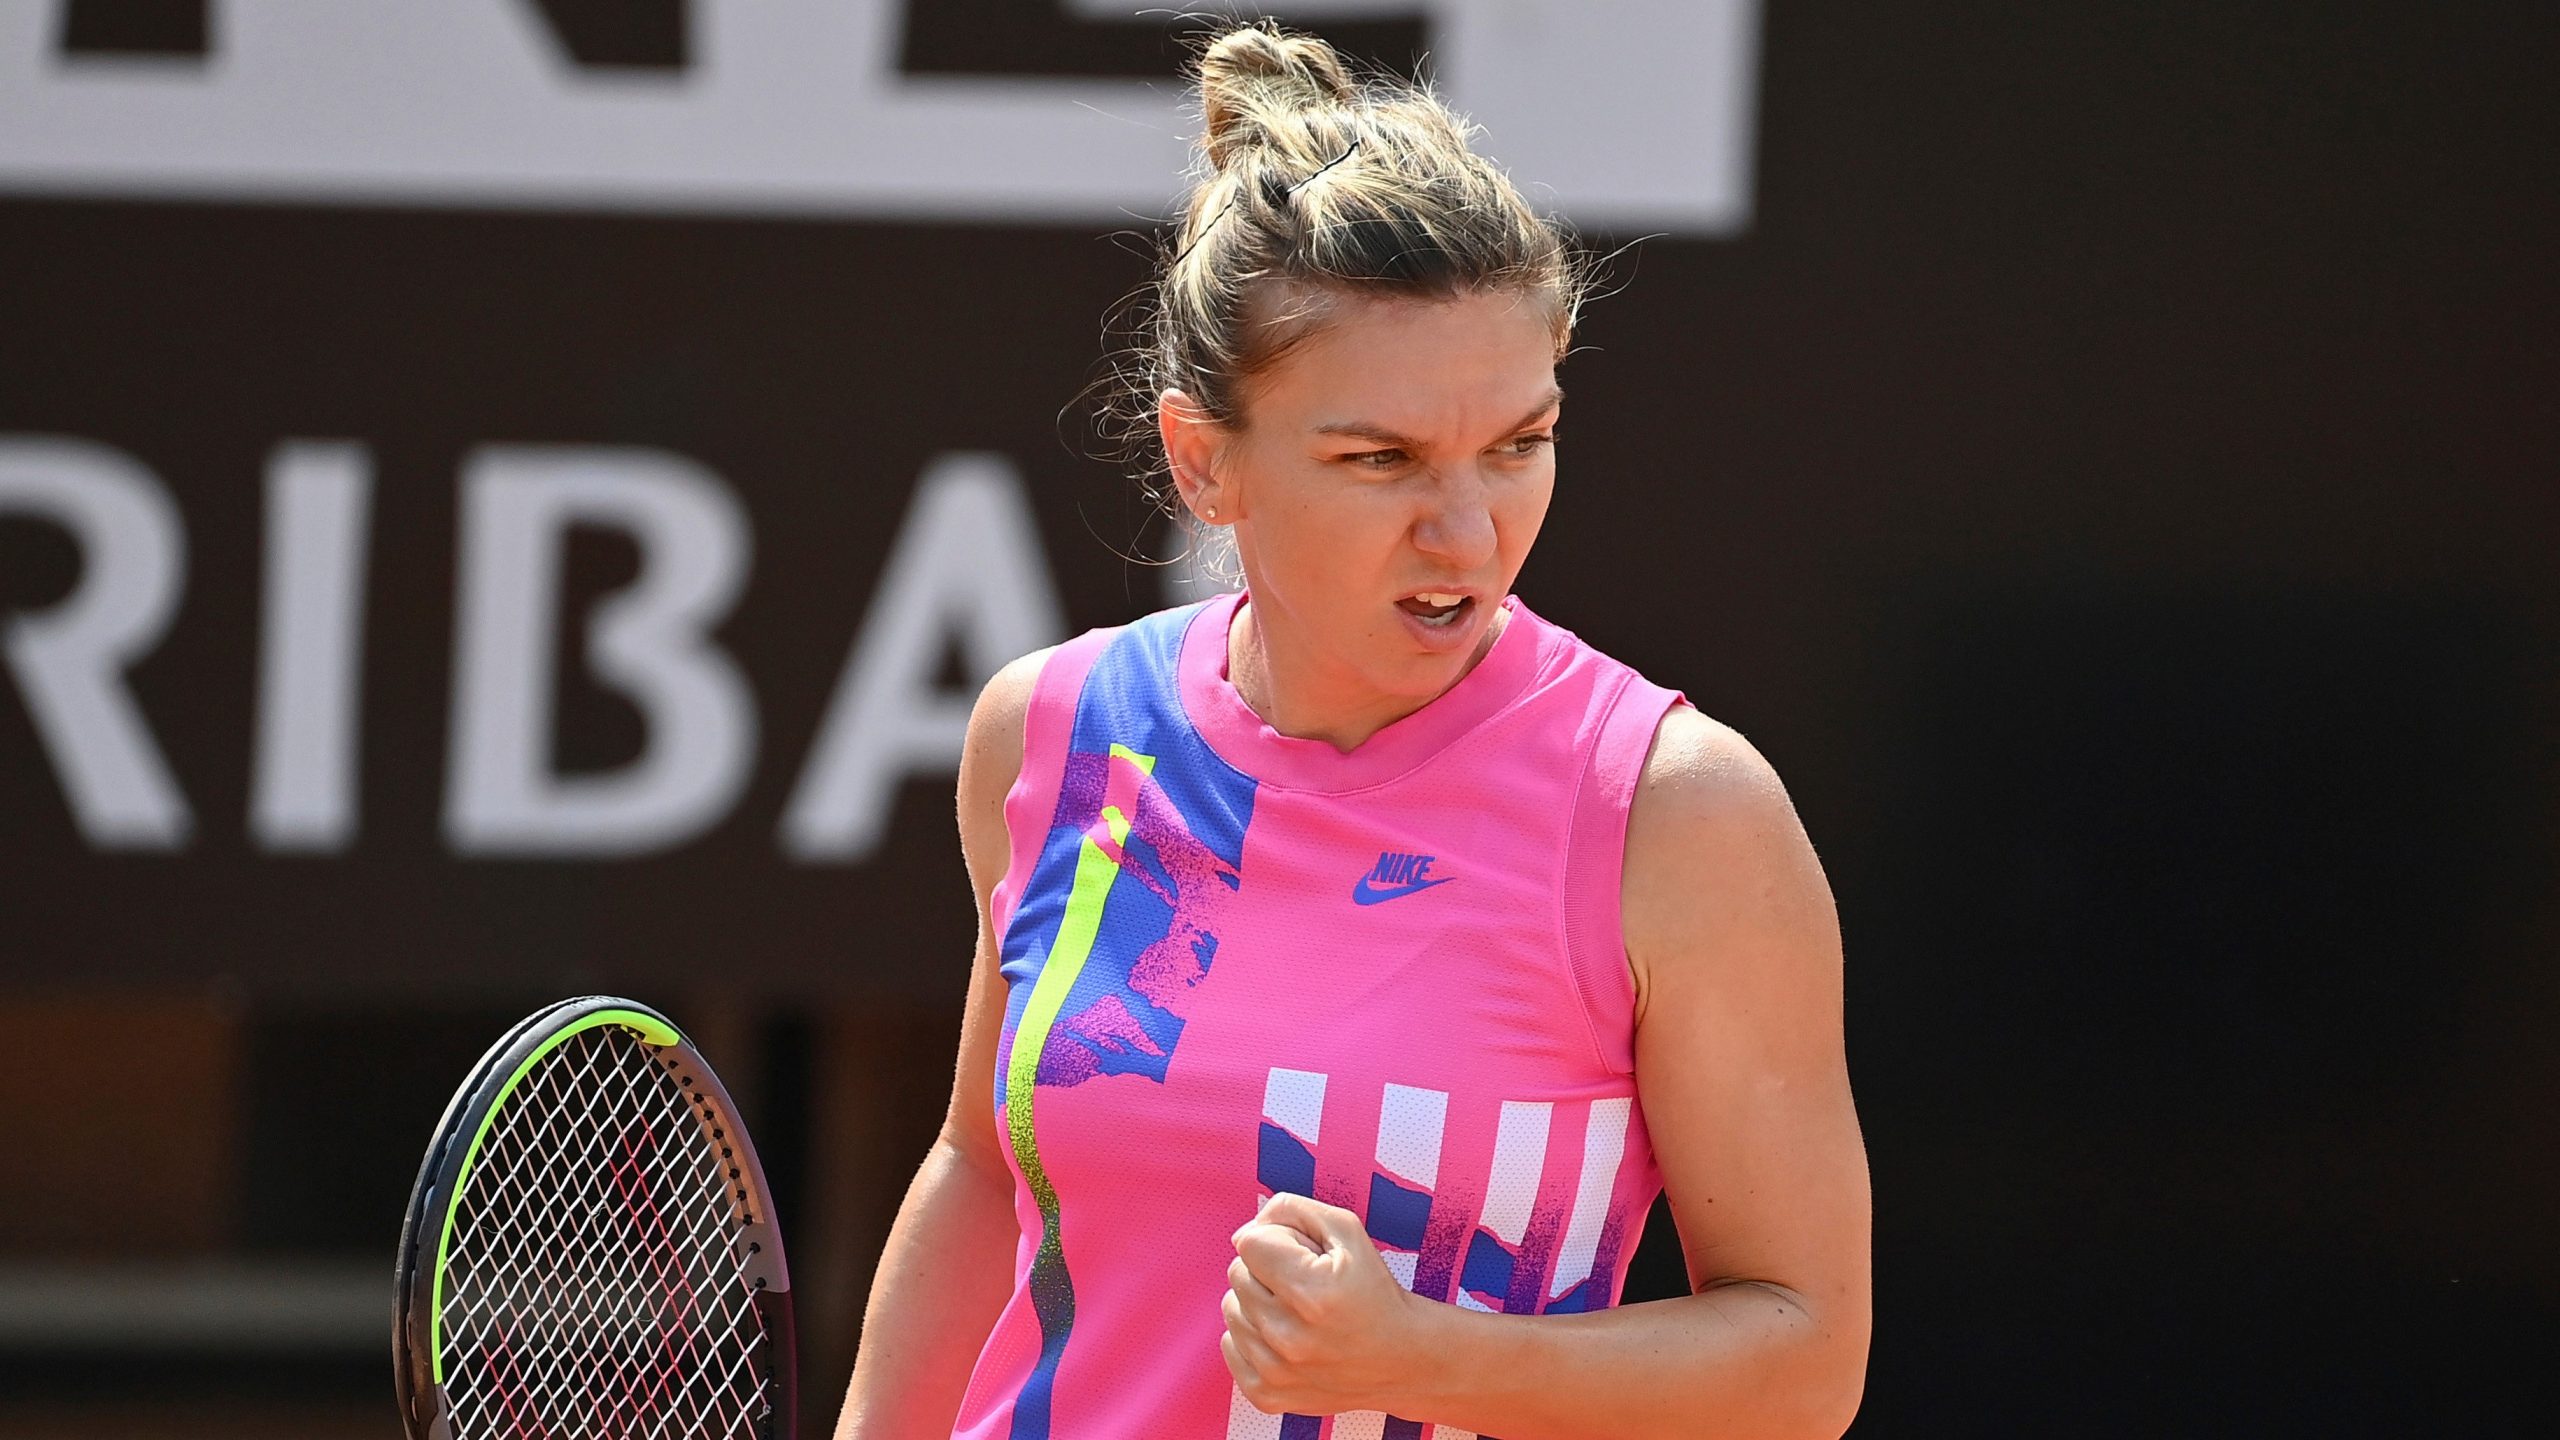 Former champ Halep reaches French Open second round, Venus Williams out